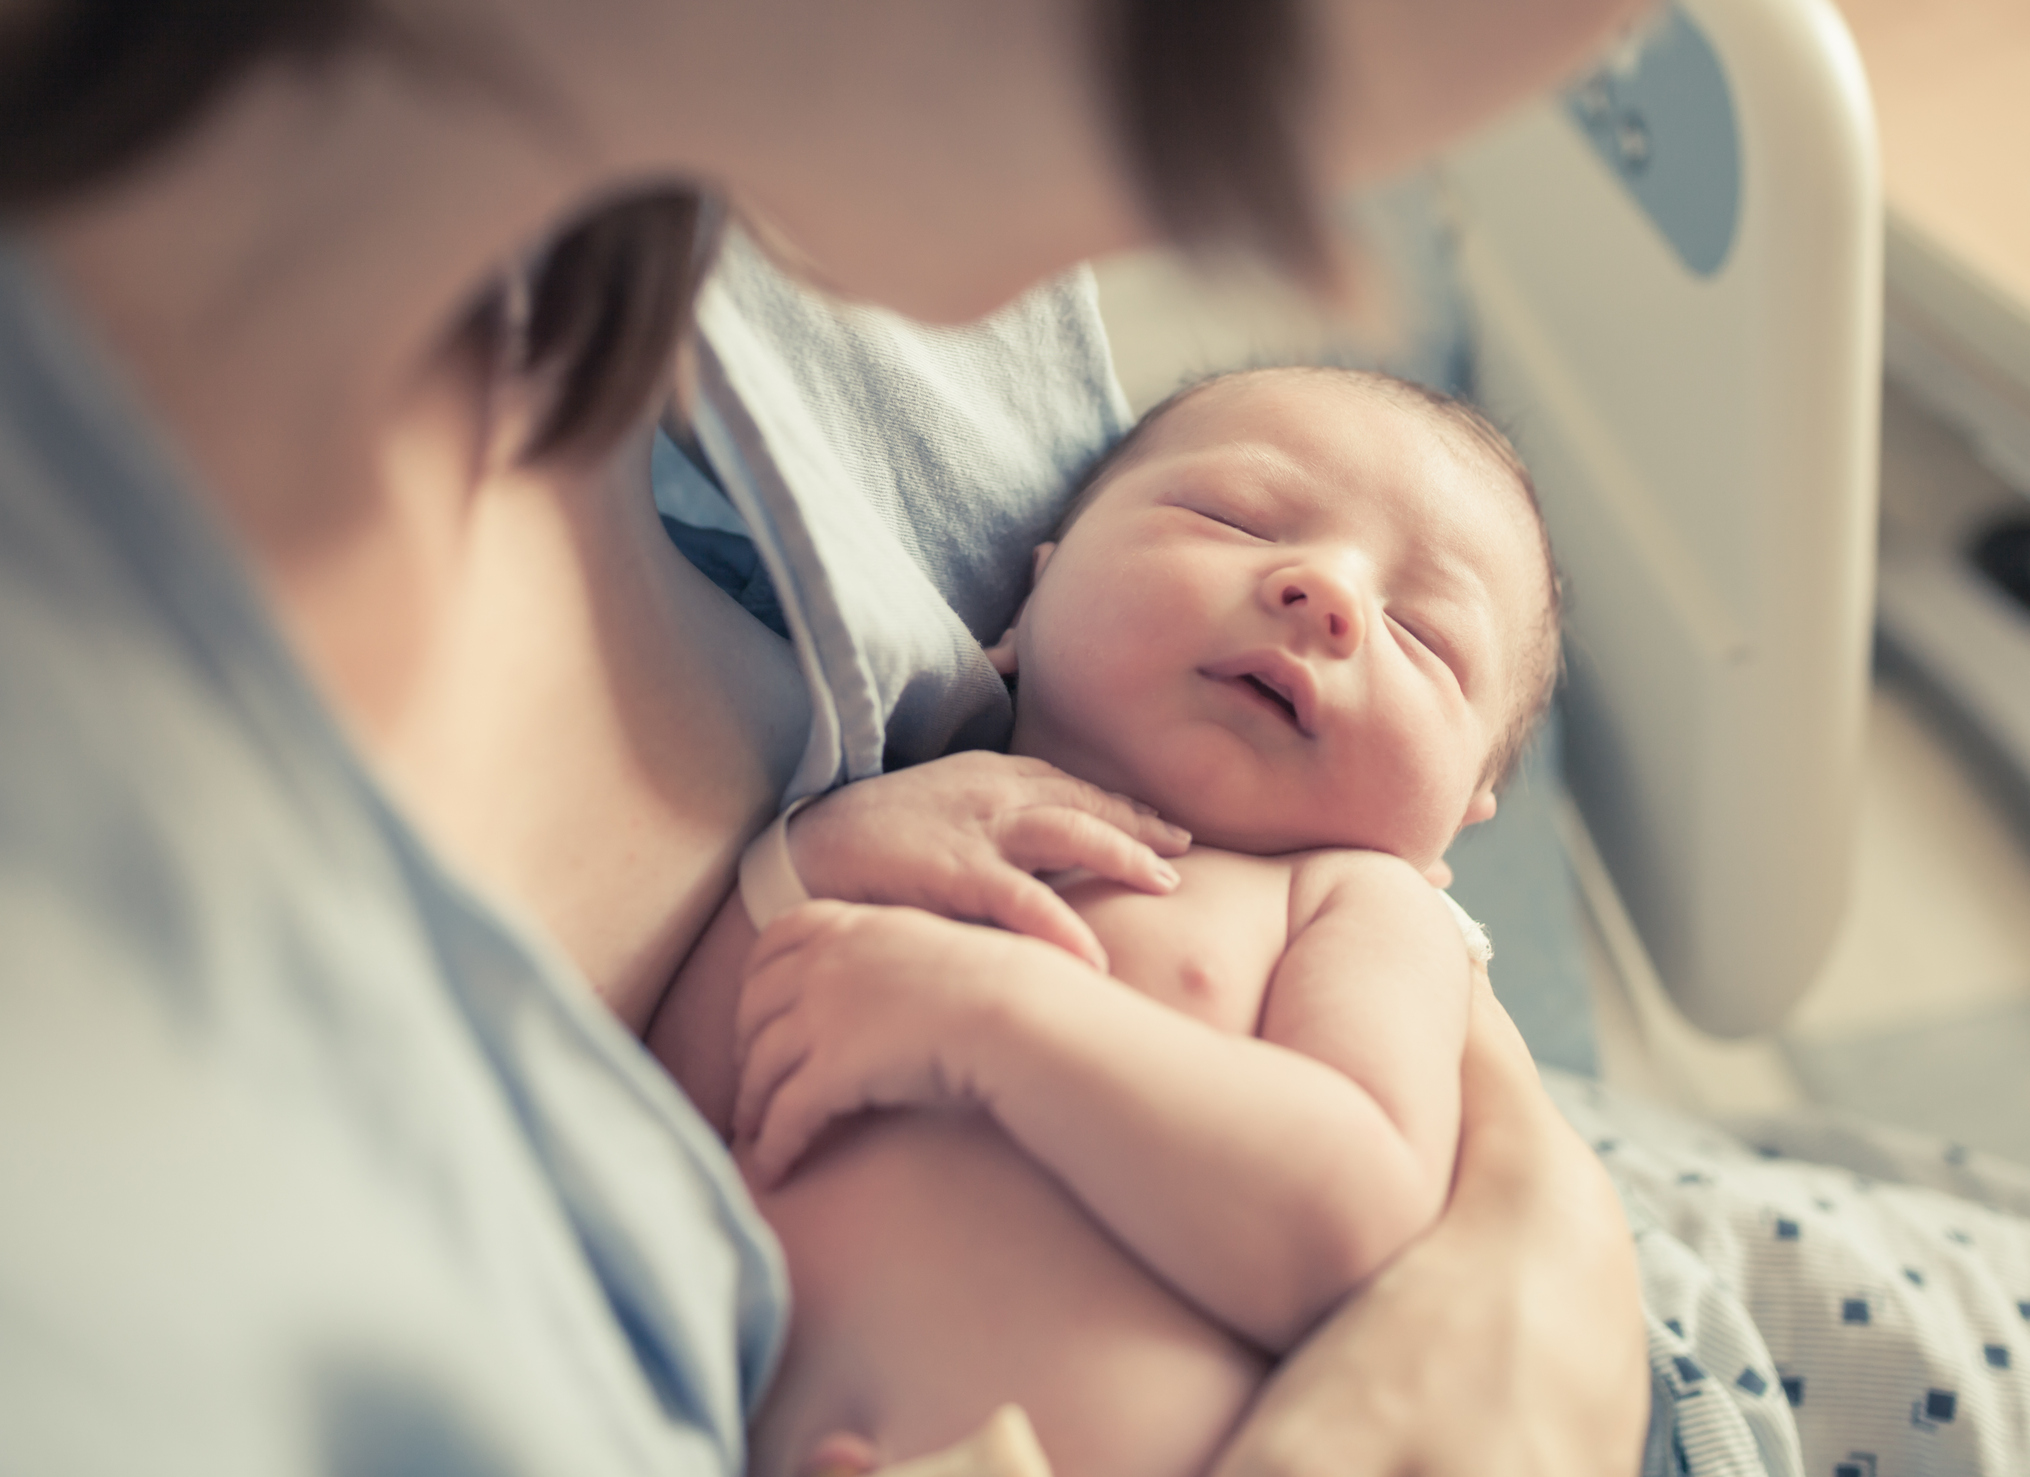 The Do's and Don'ts of Healing from a C-Section